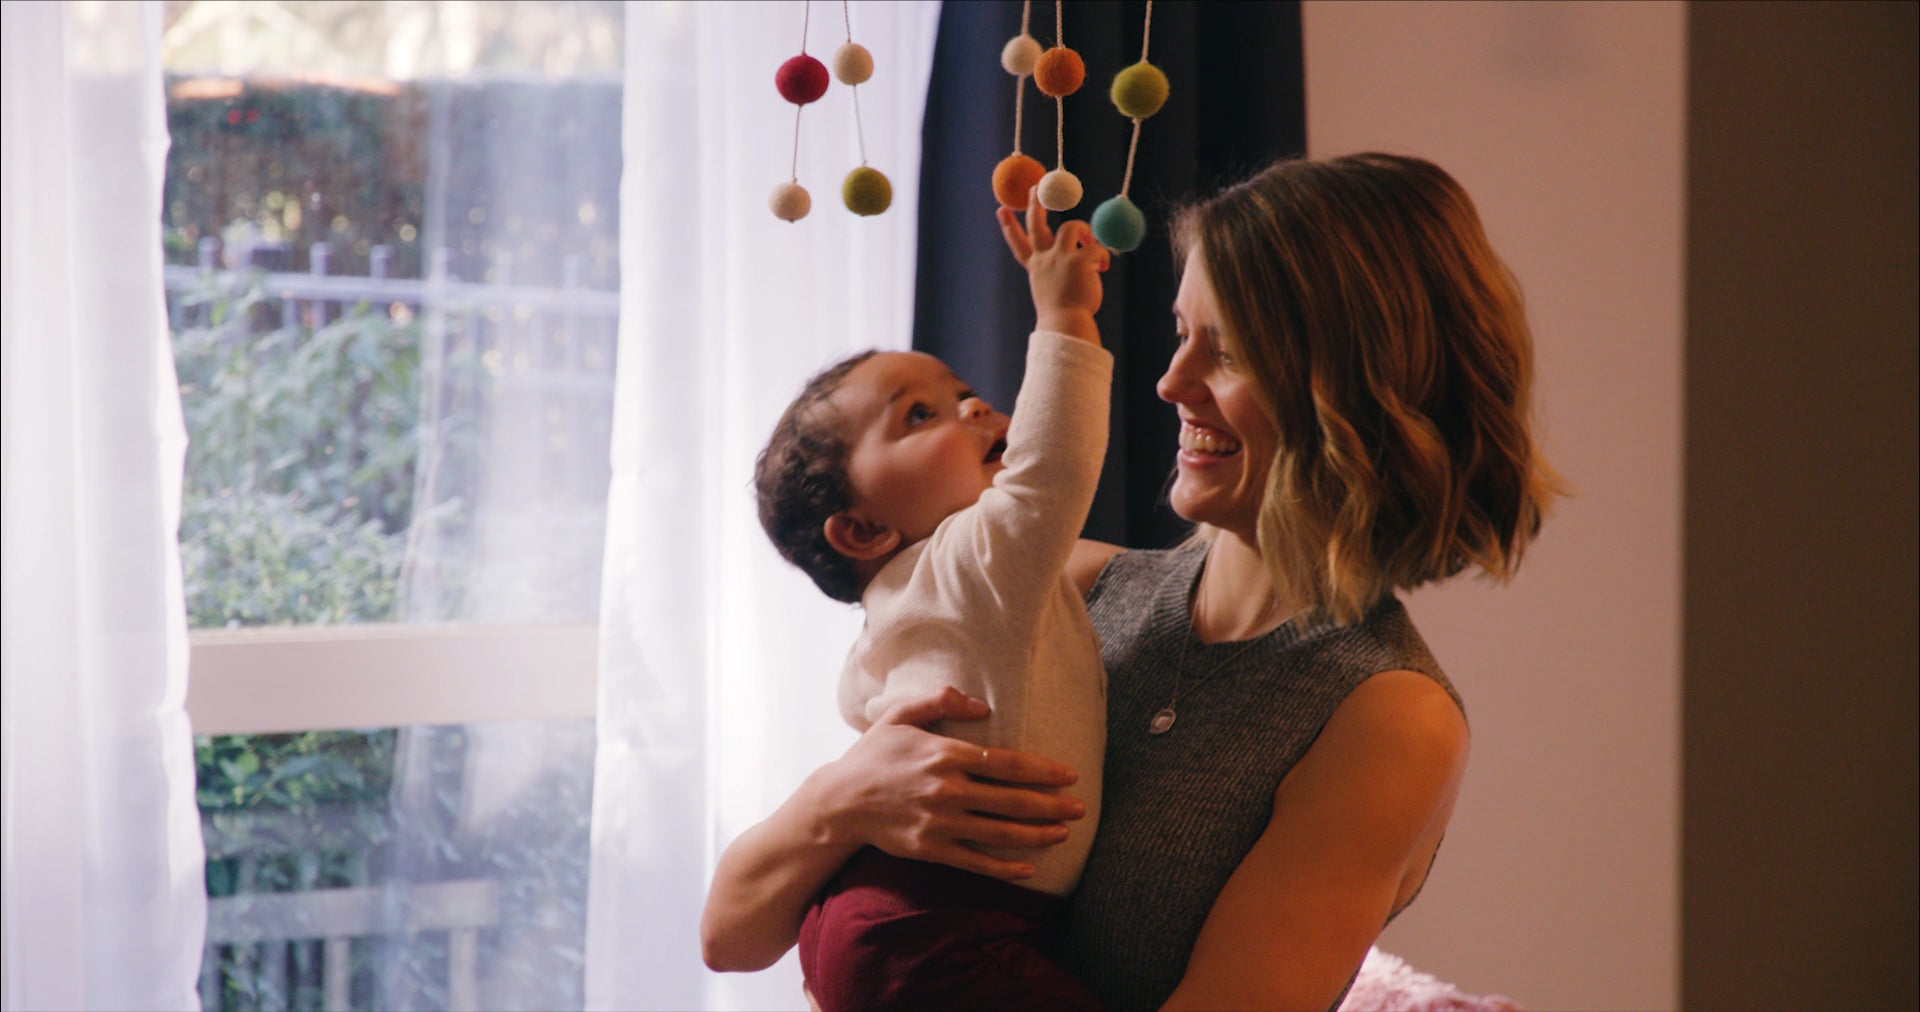 Woman holding baby in her arms as baby reaches for hanging mobile above